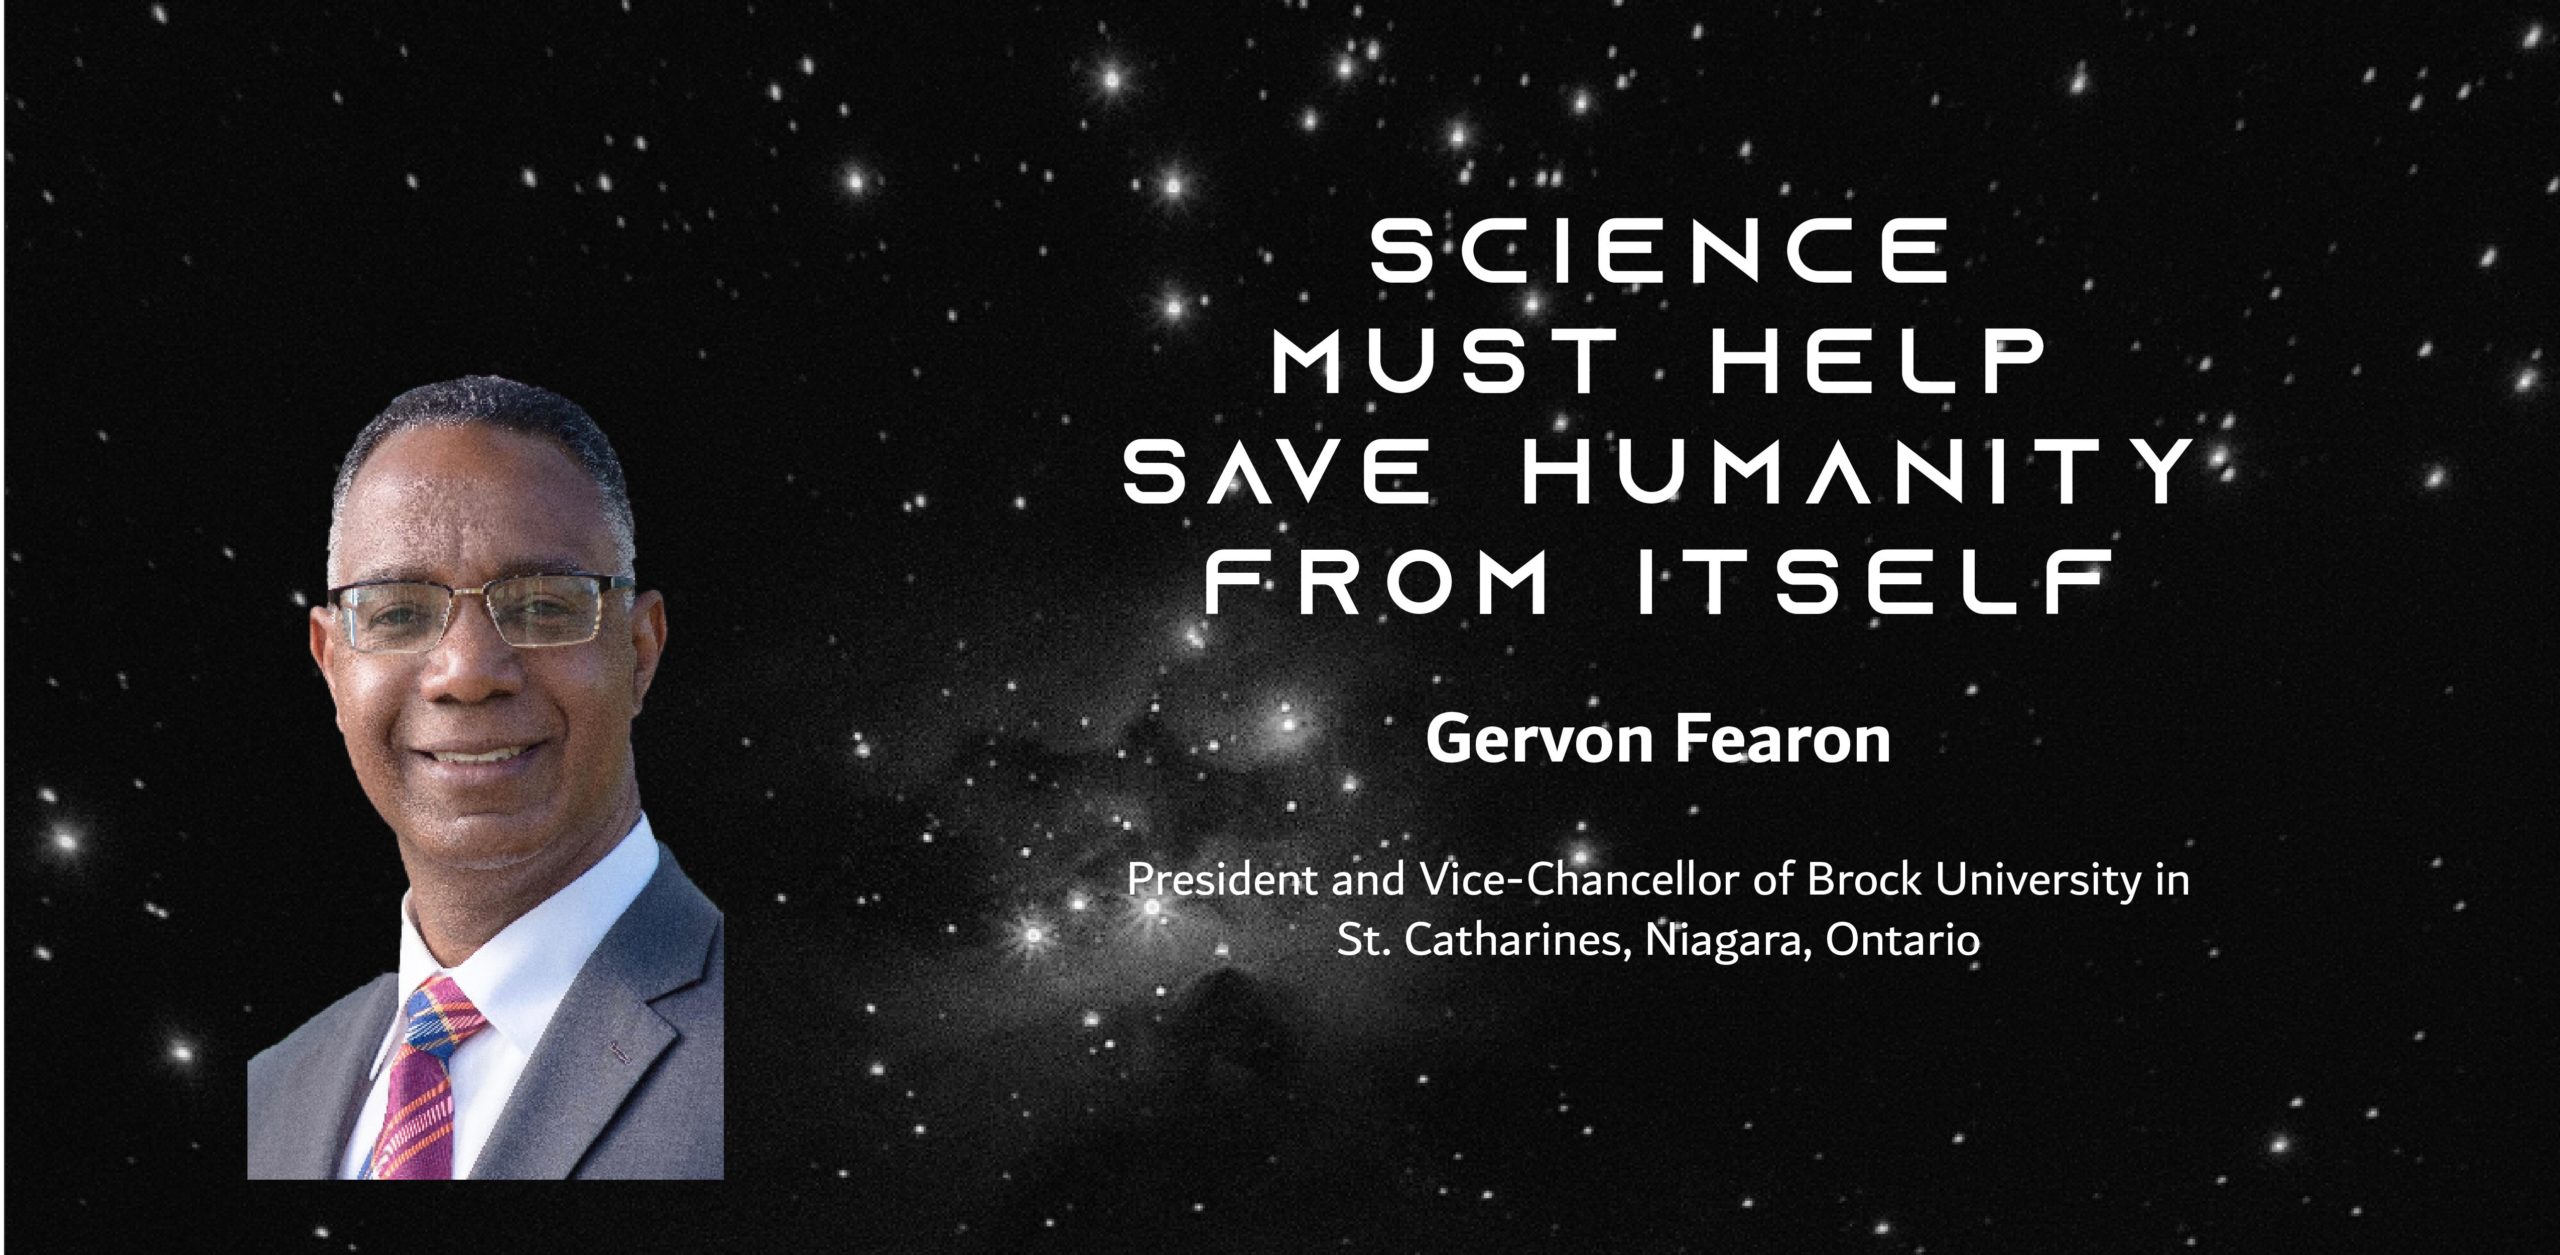 A photo of a black man in a suit on a starry sky with the text: Science must help save humanity from itself By Gervan Fearon President and Vice-Chancellor of Brock University in St. Catharines, Niagara, Ontario